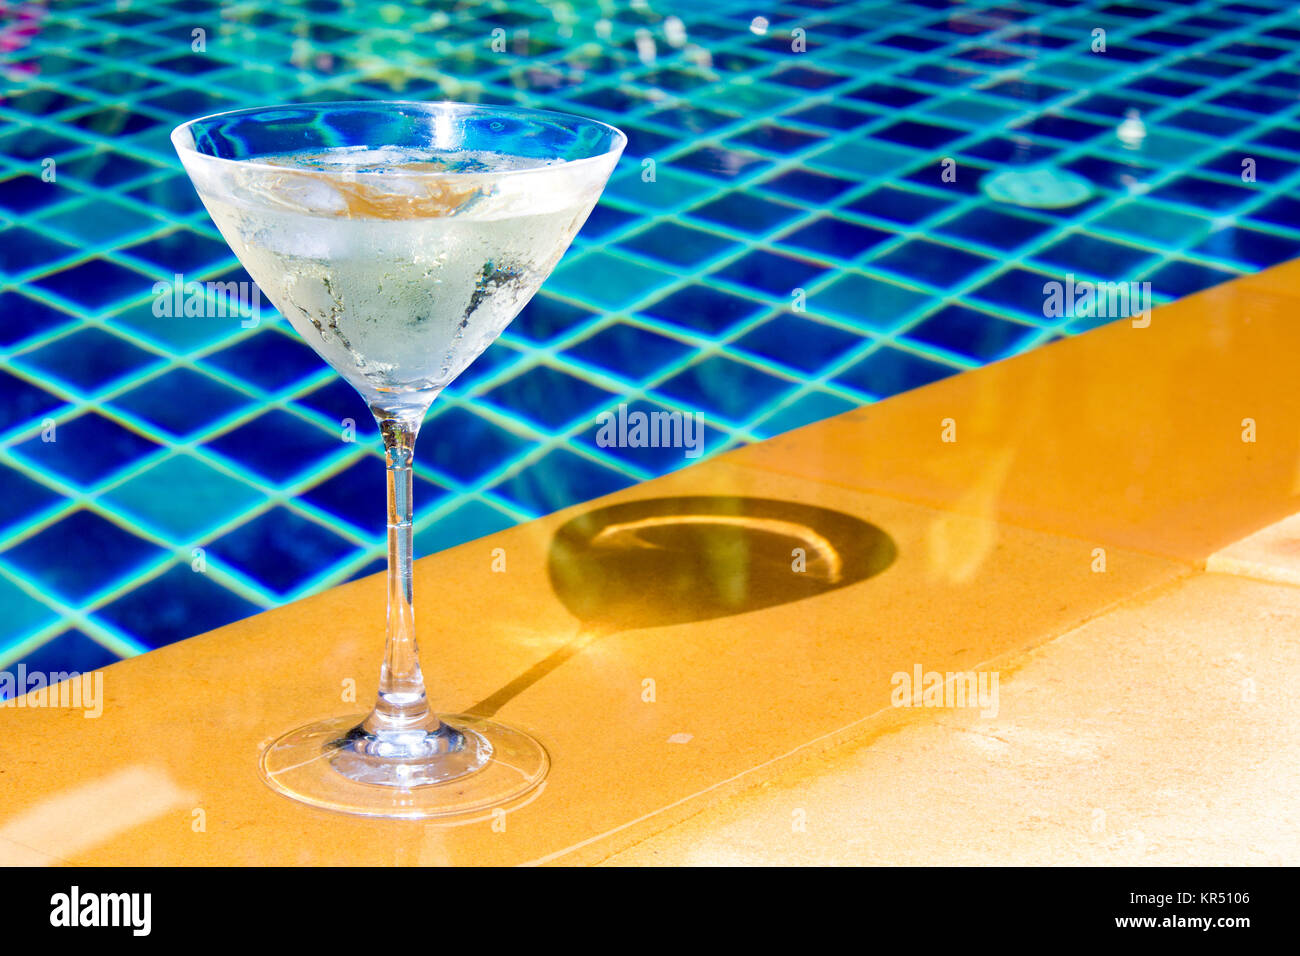 Cool cocktail standing by swimming pool Stock Photo